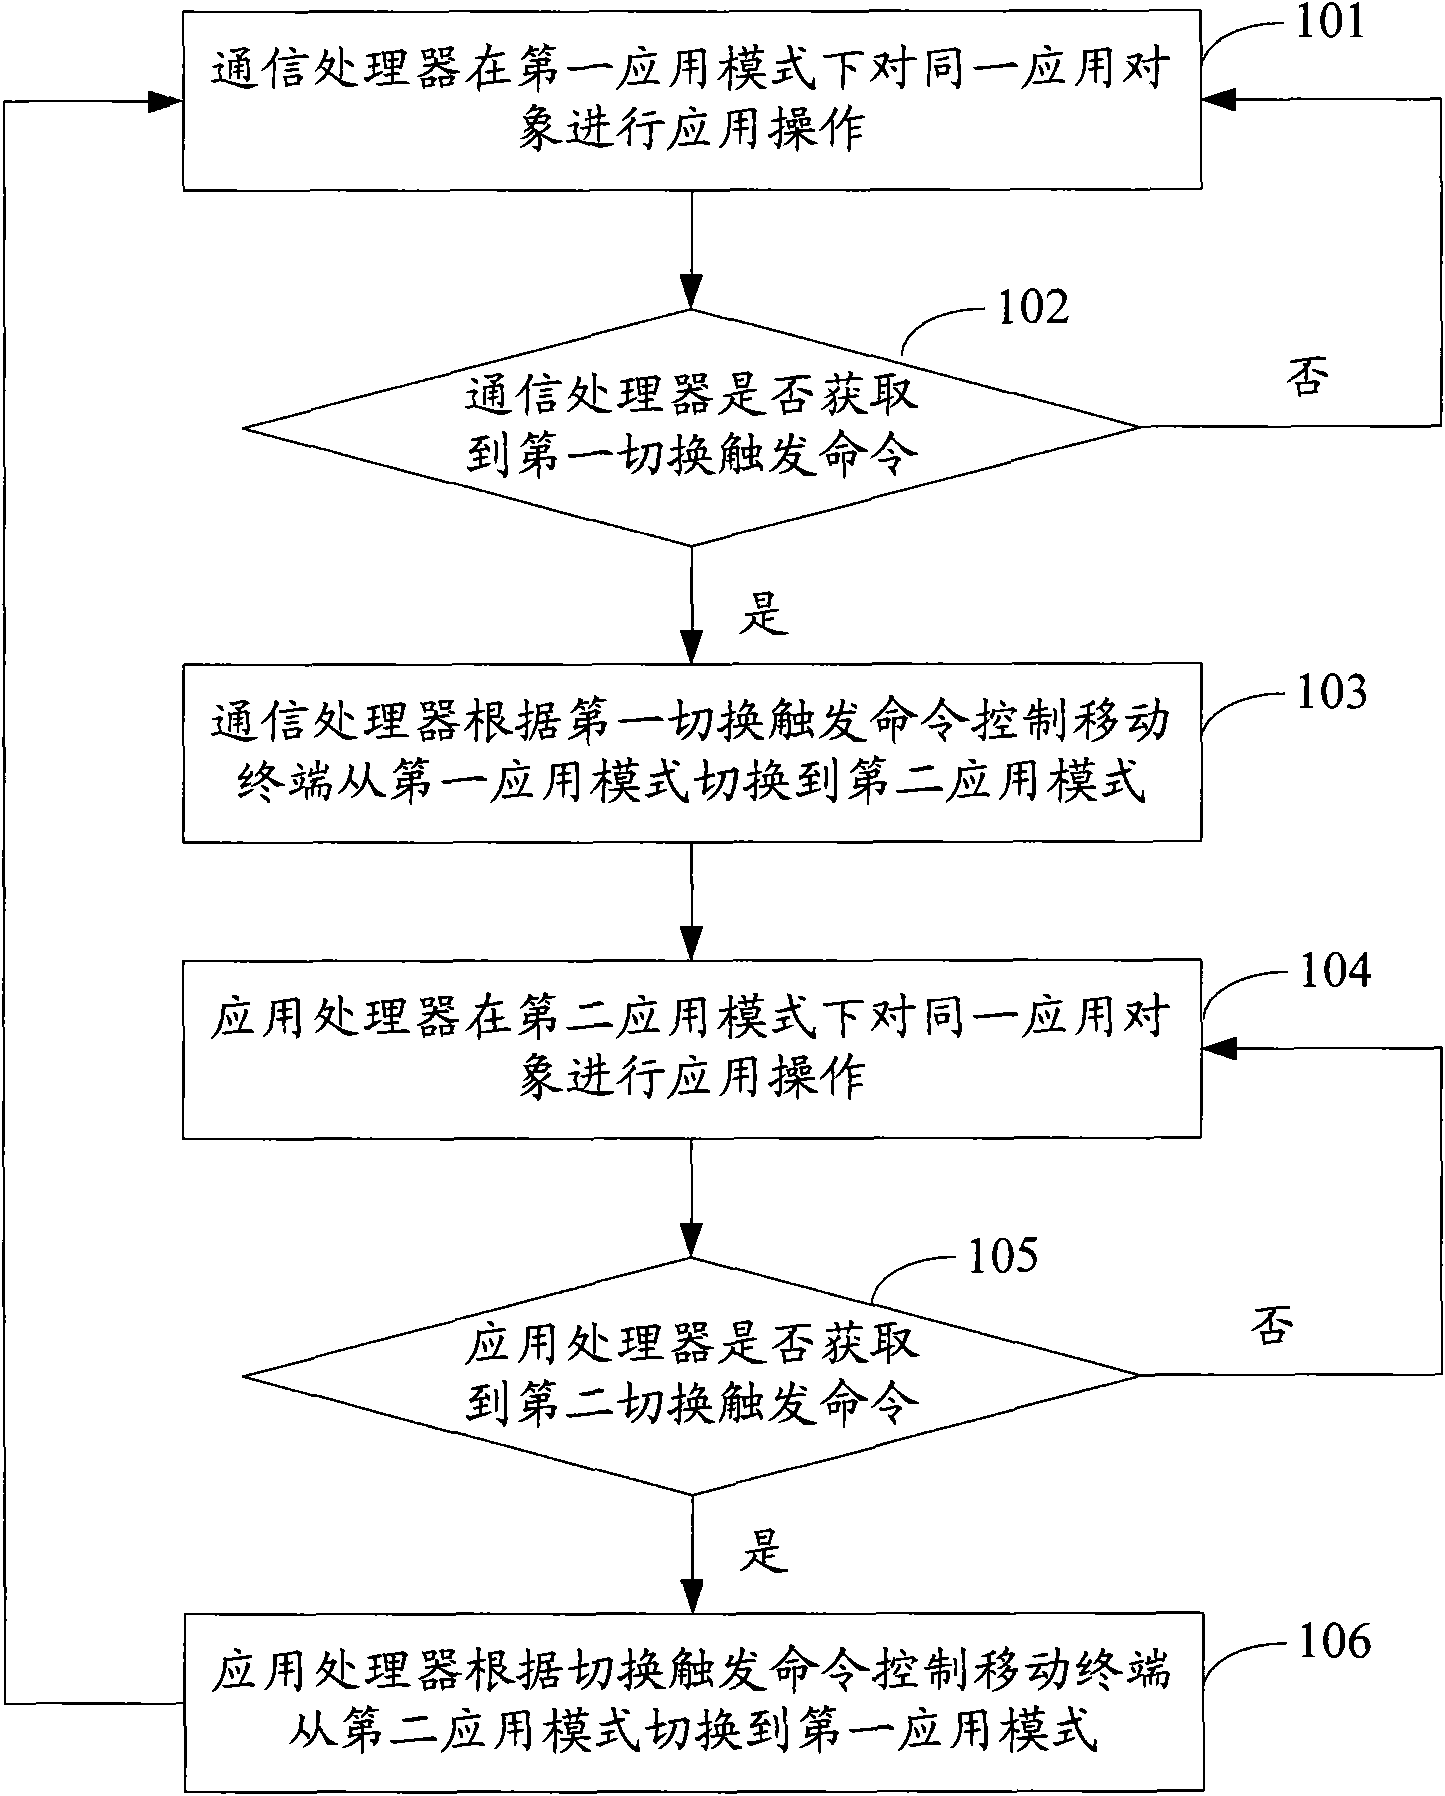 Mobile terminal operating mode switching method and mobile terminal